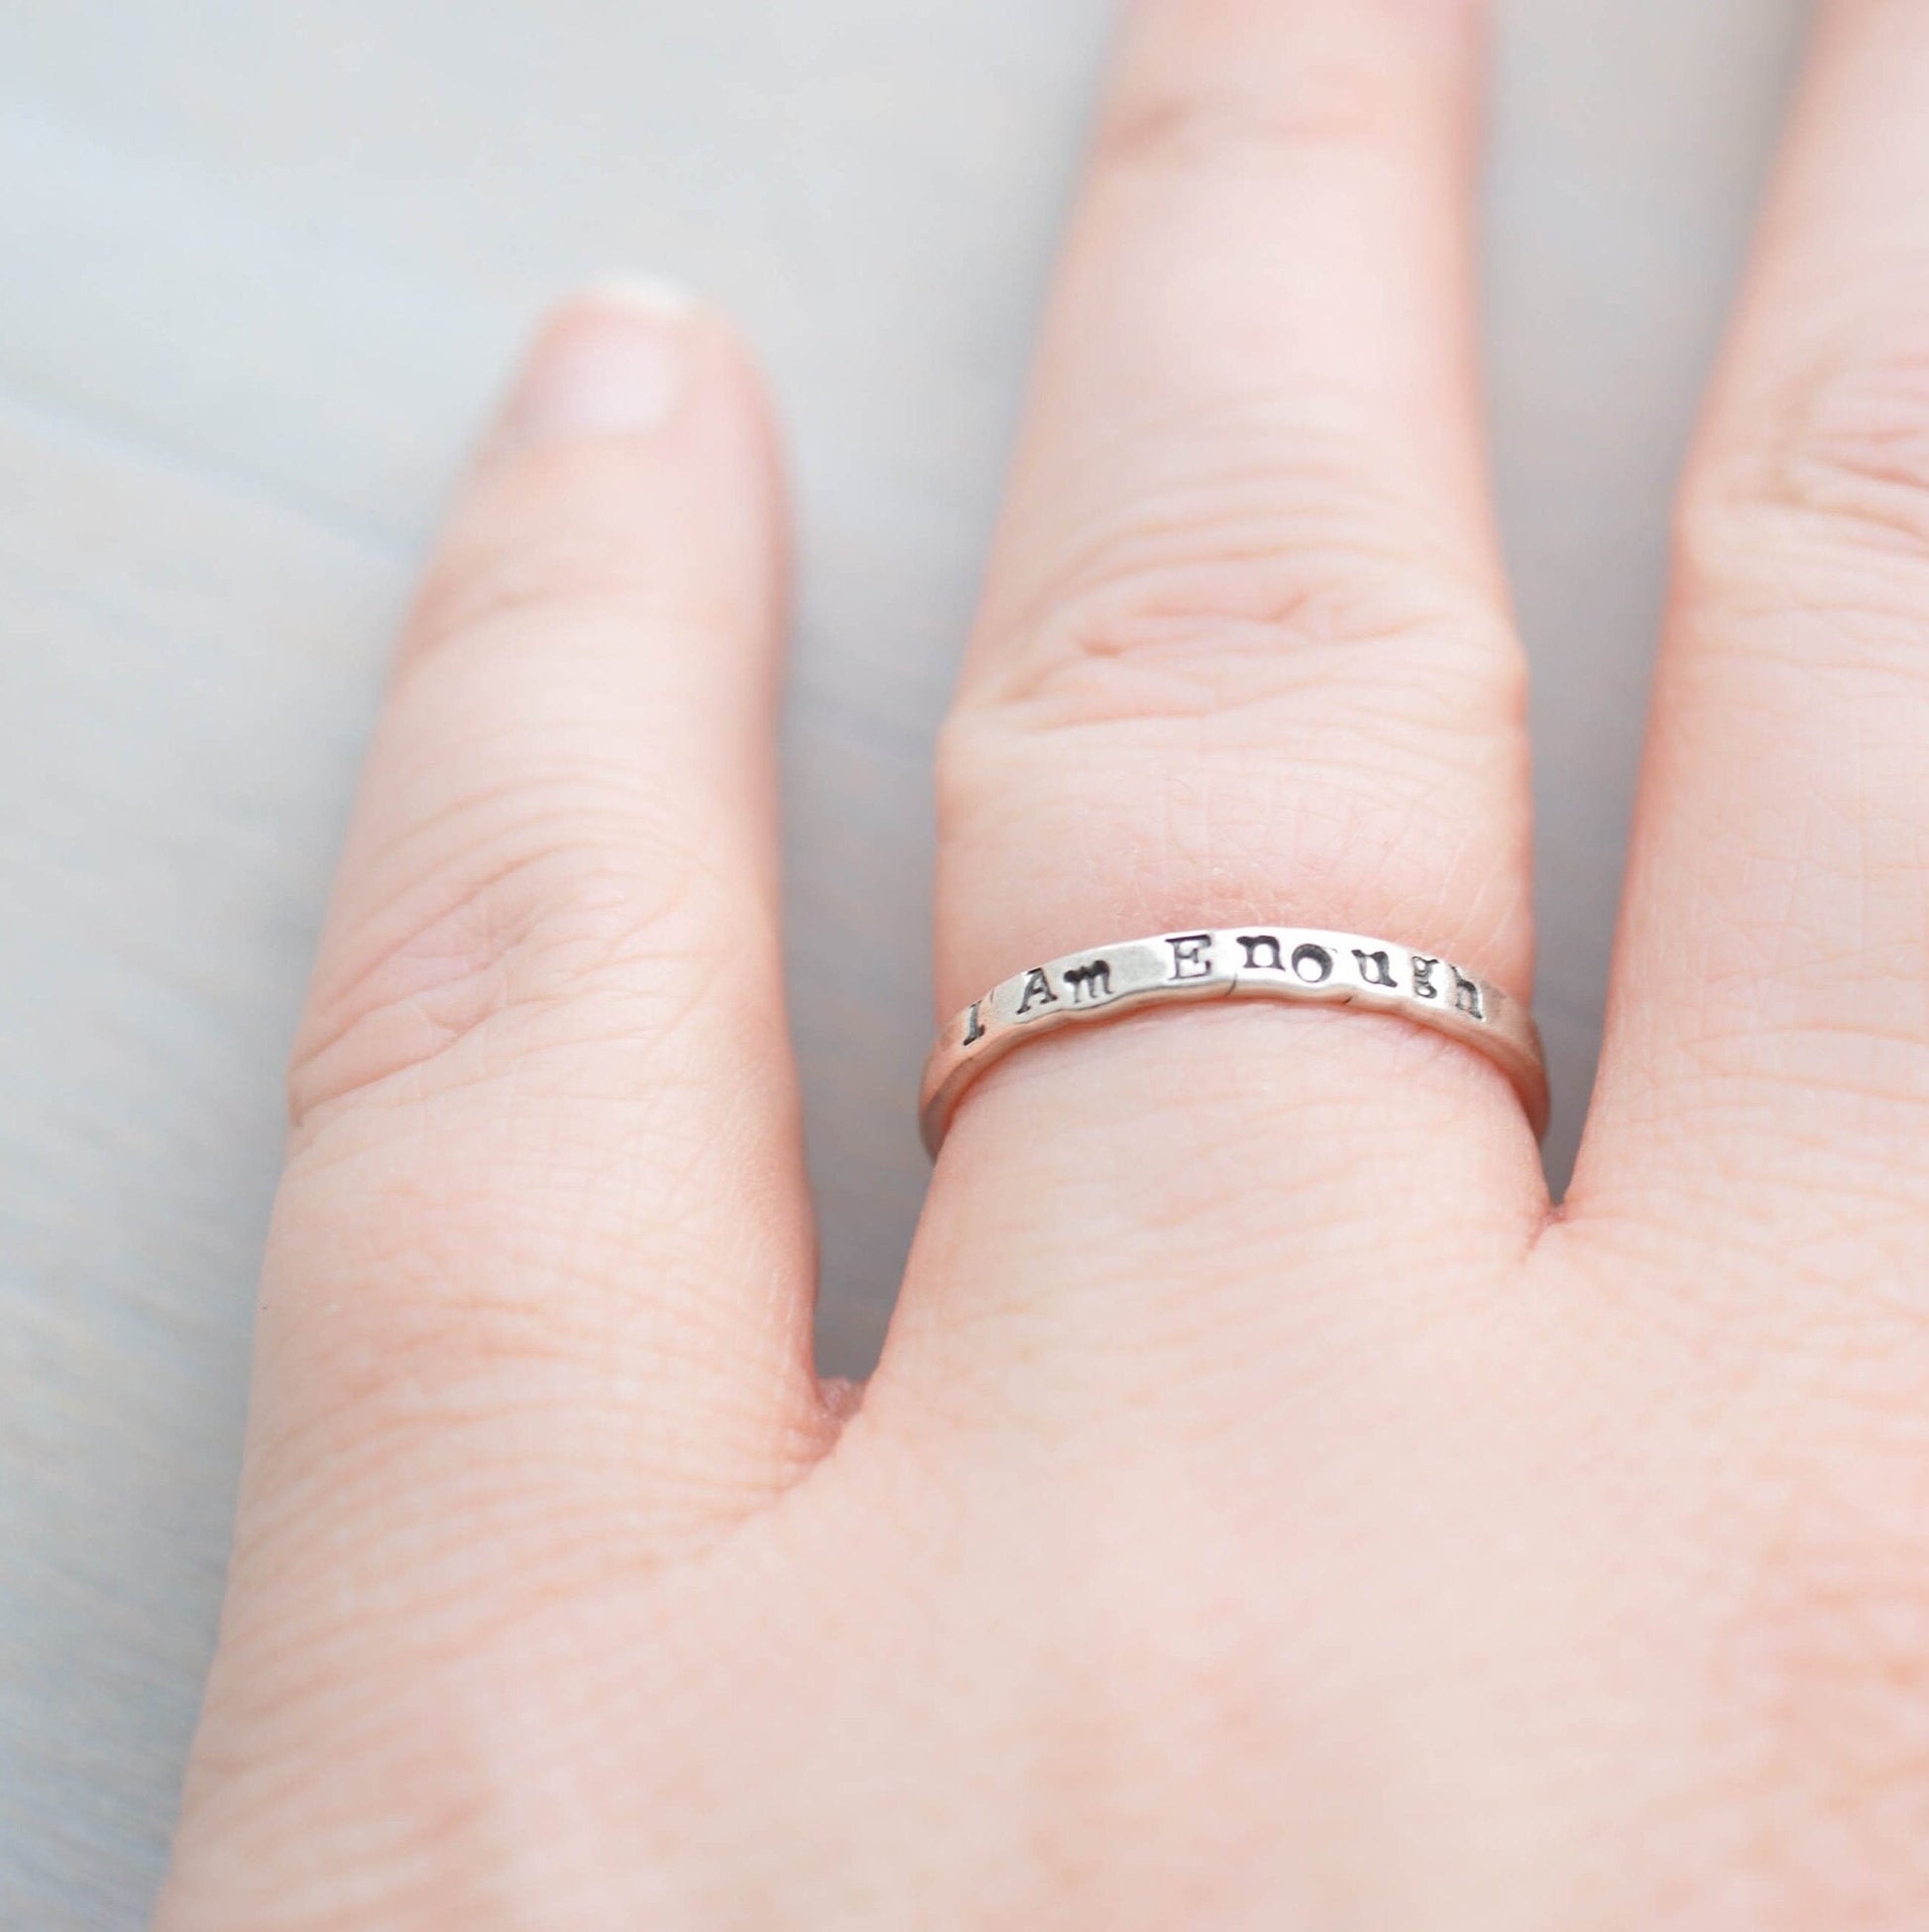 Sterling Silver stacking ring handstmaped with I Am Enough on hand